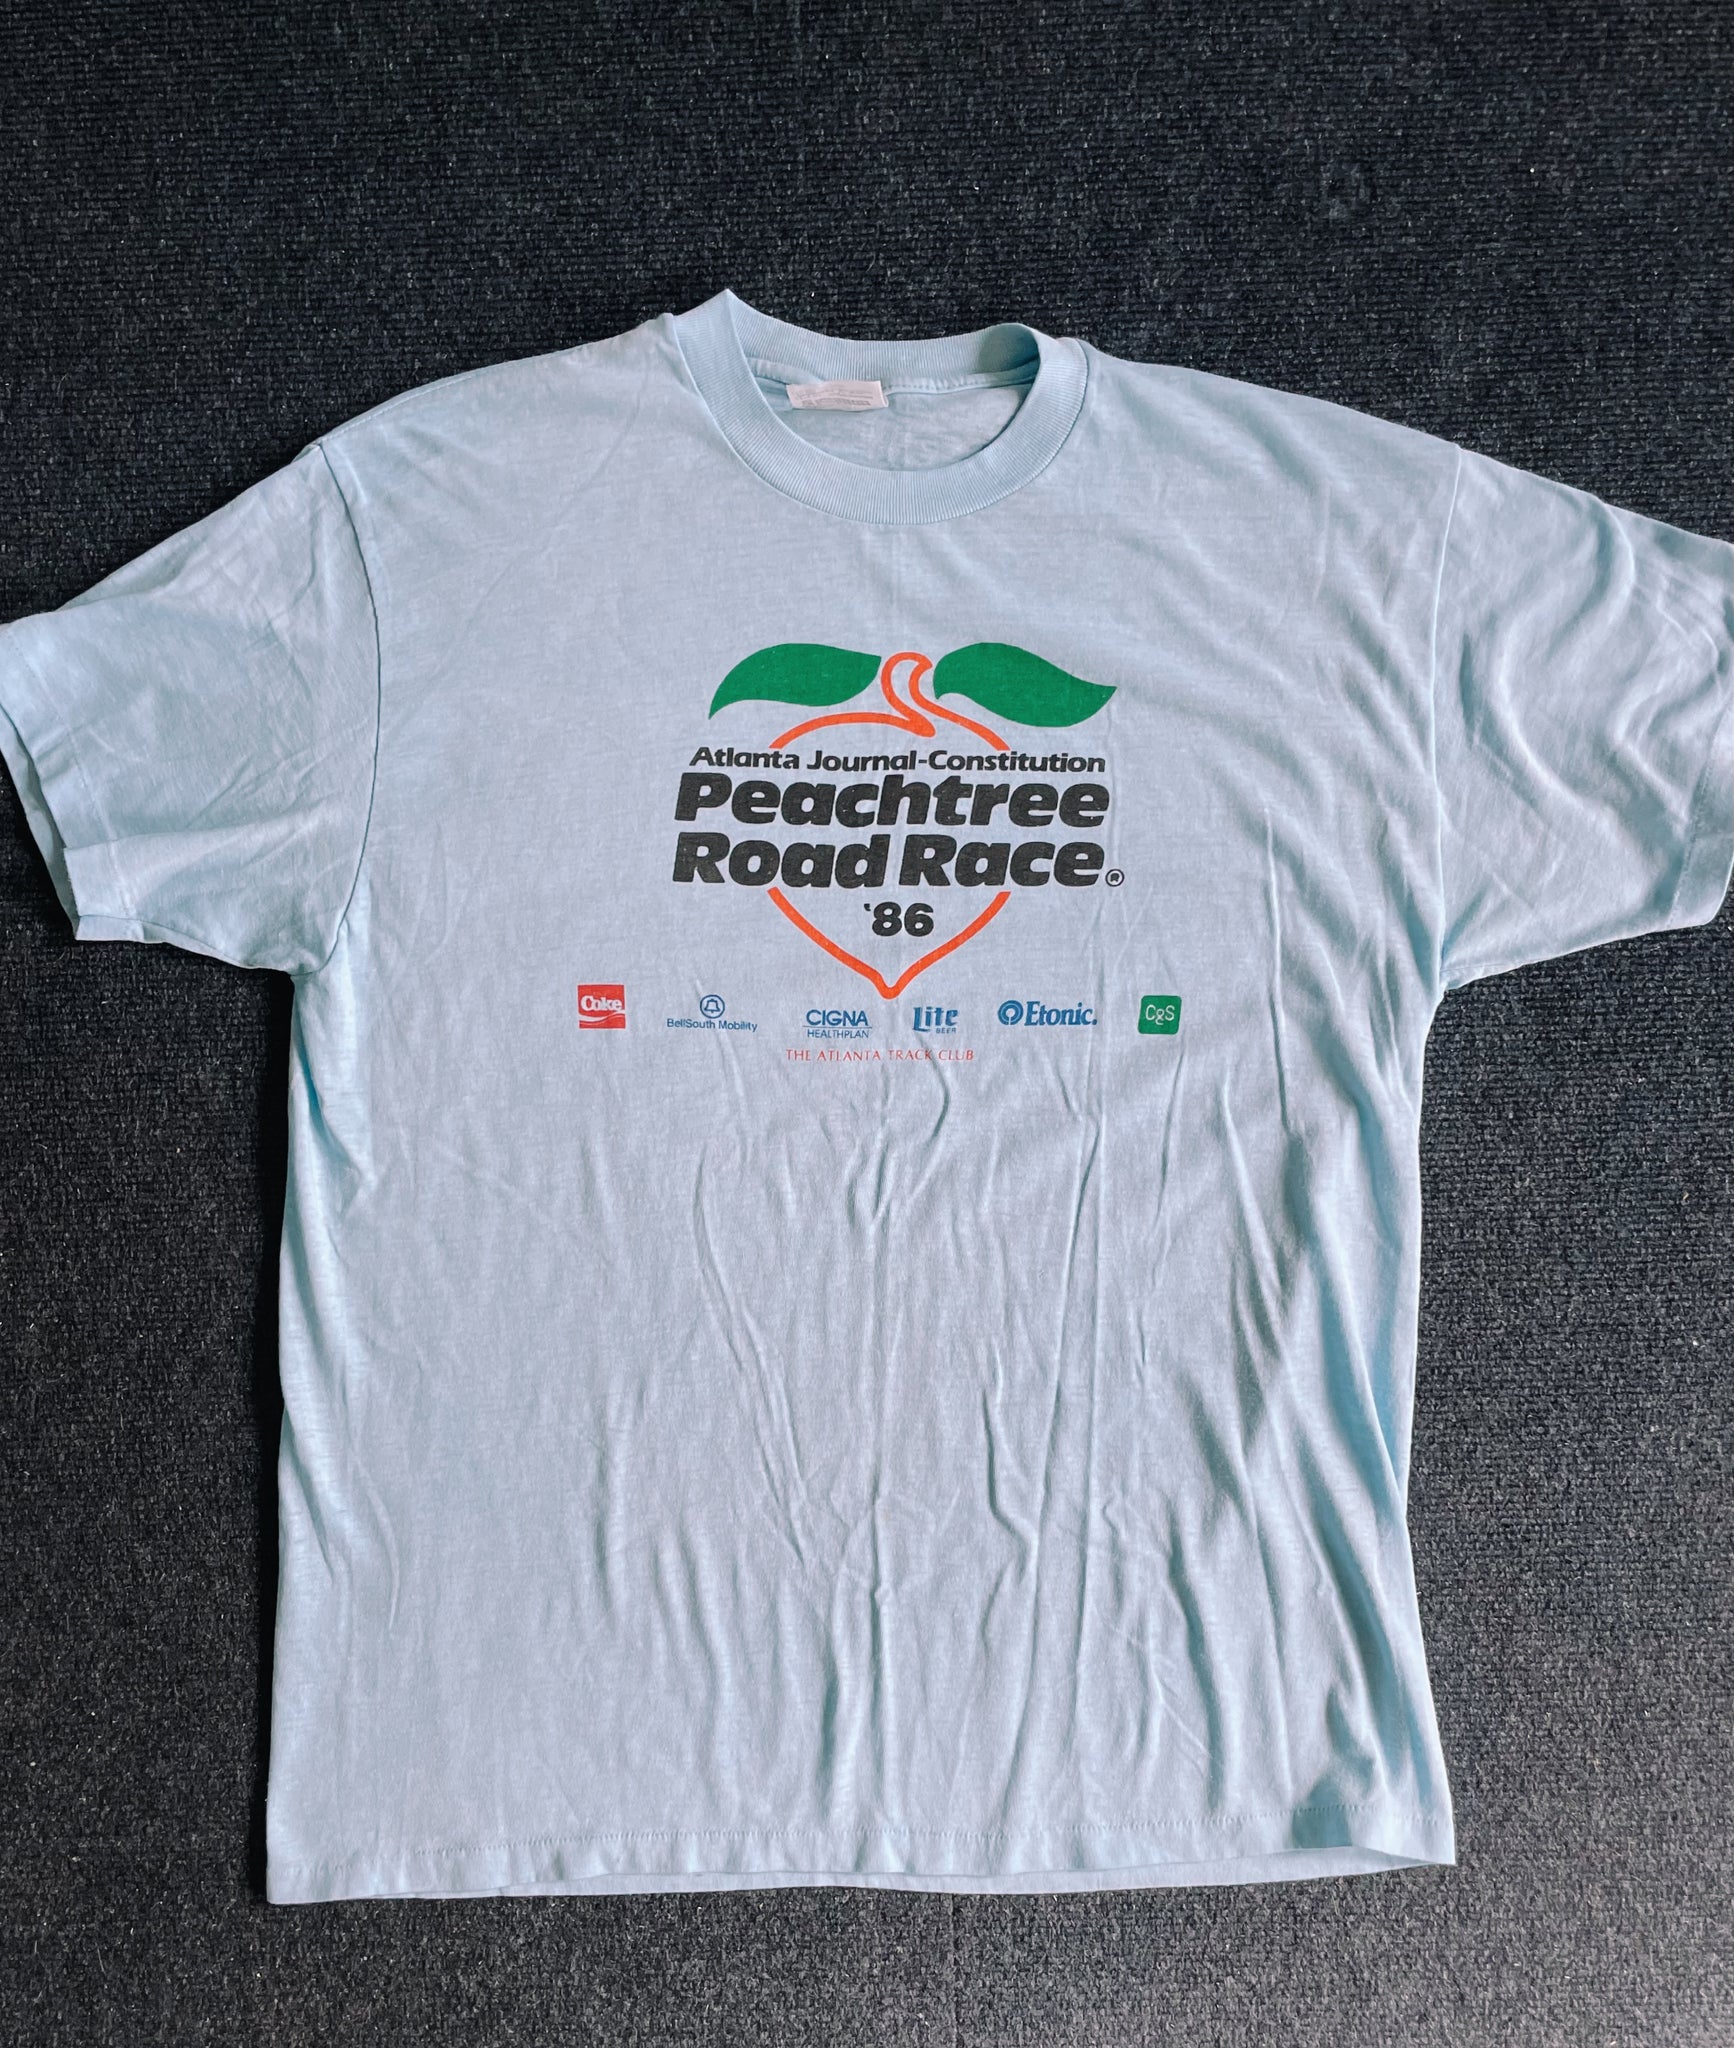 Vintage “Peachtree Road Race” T-Shirt (1986)